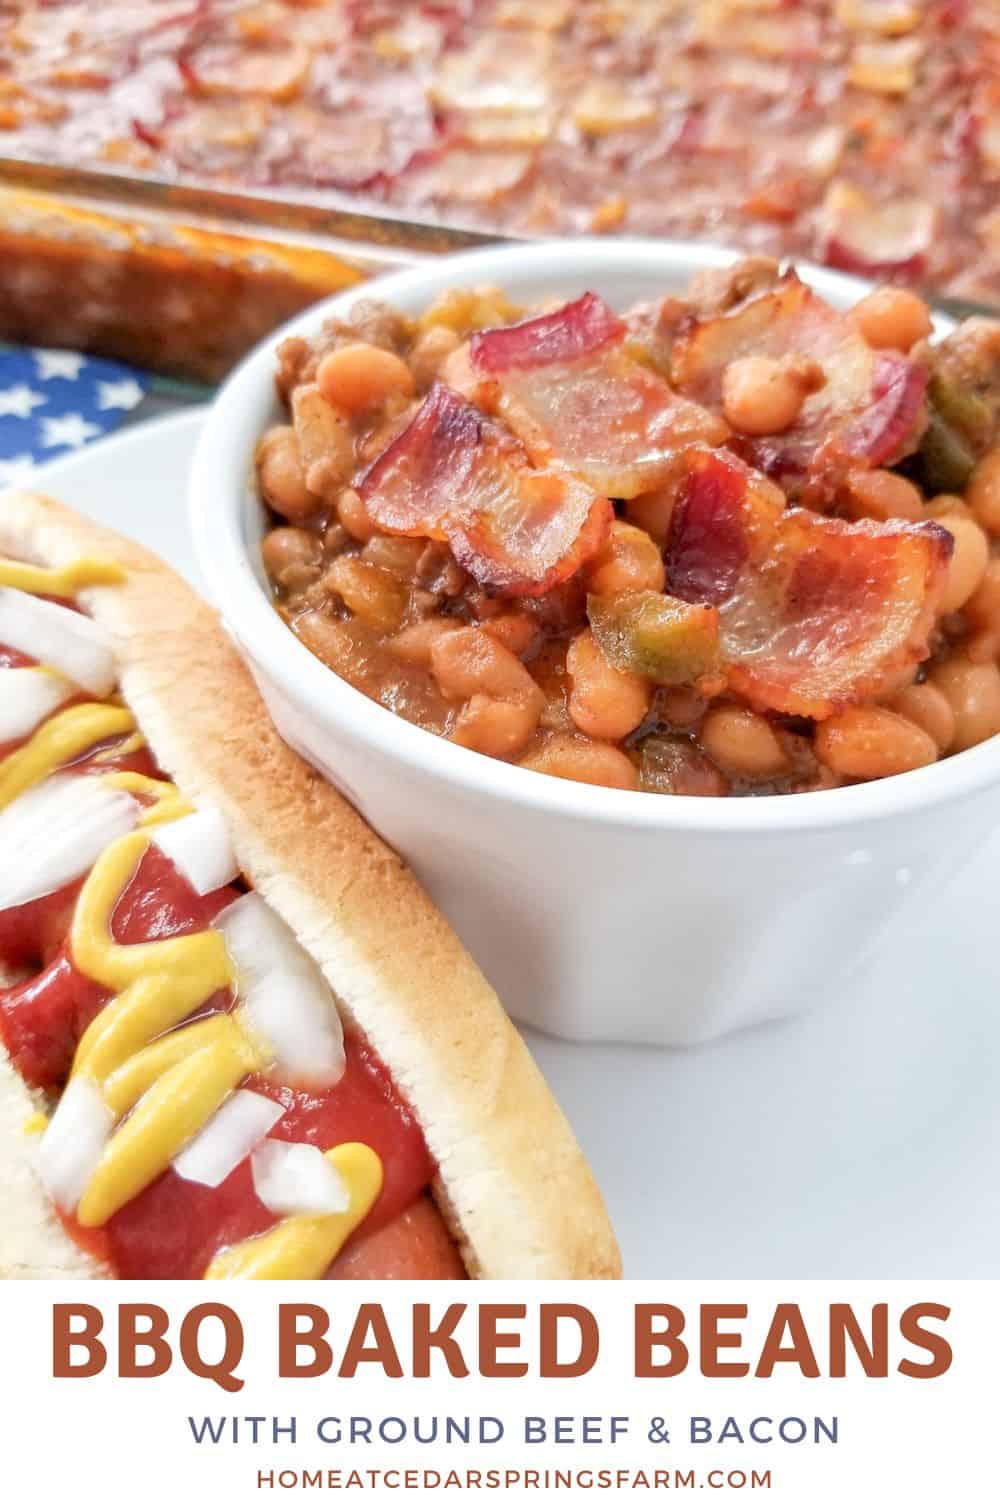 Southern BBQ Baked Beans on a plate with a hot dog and casserole of baked beans.